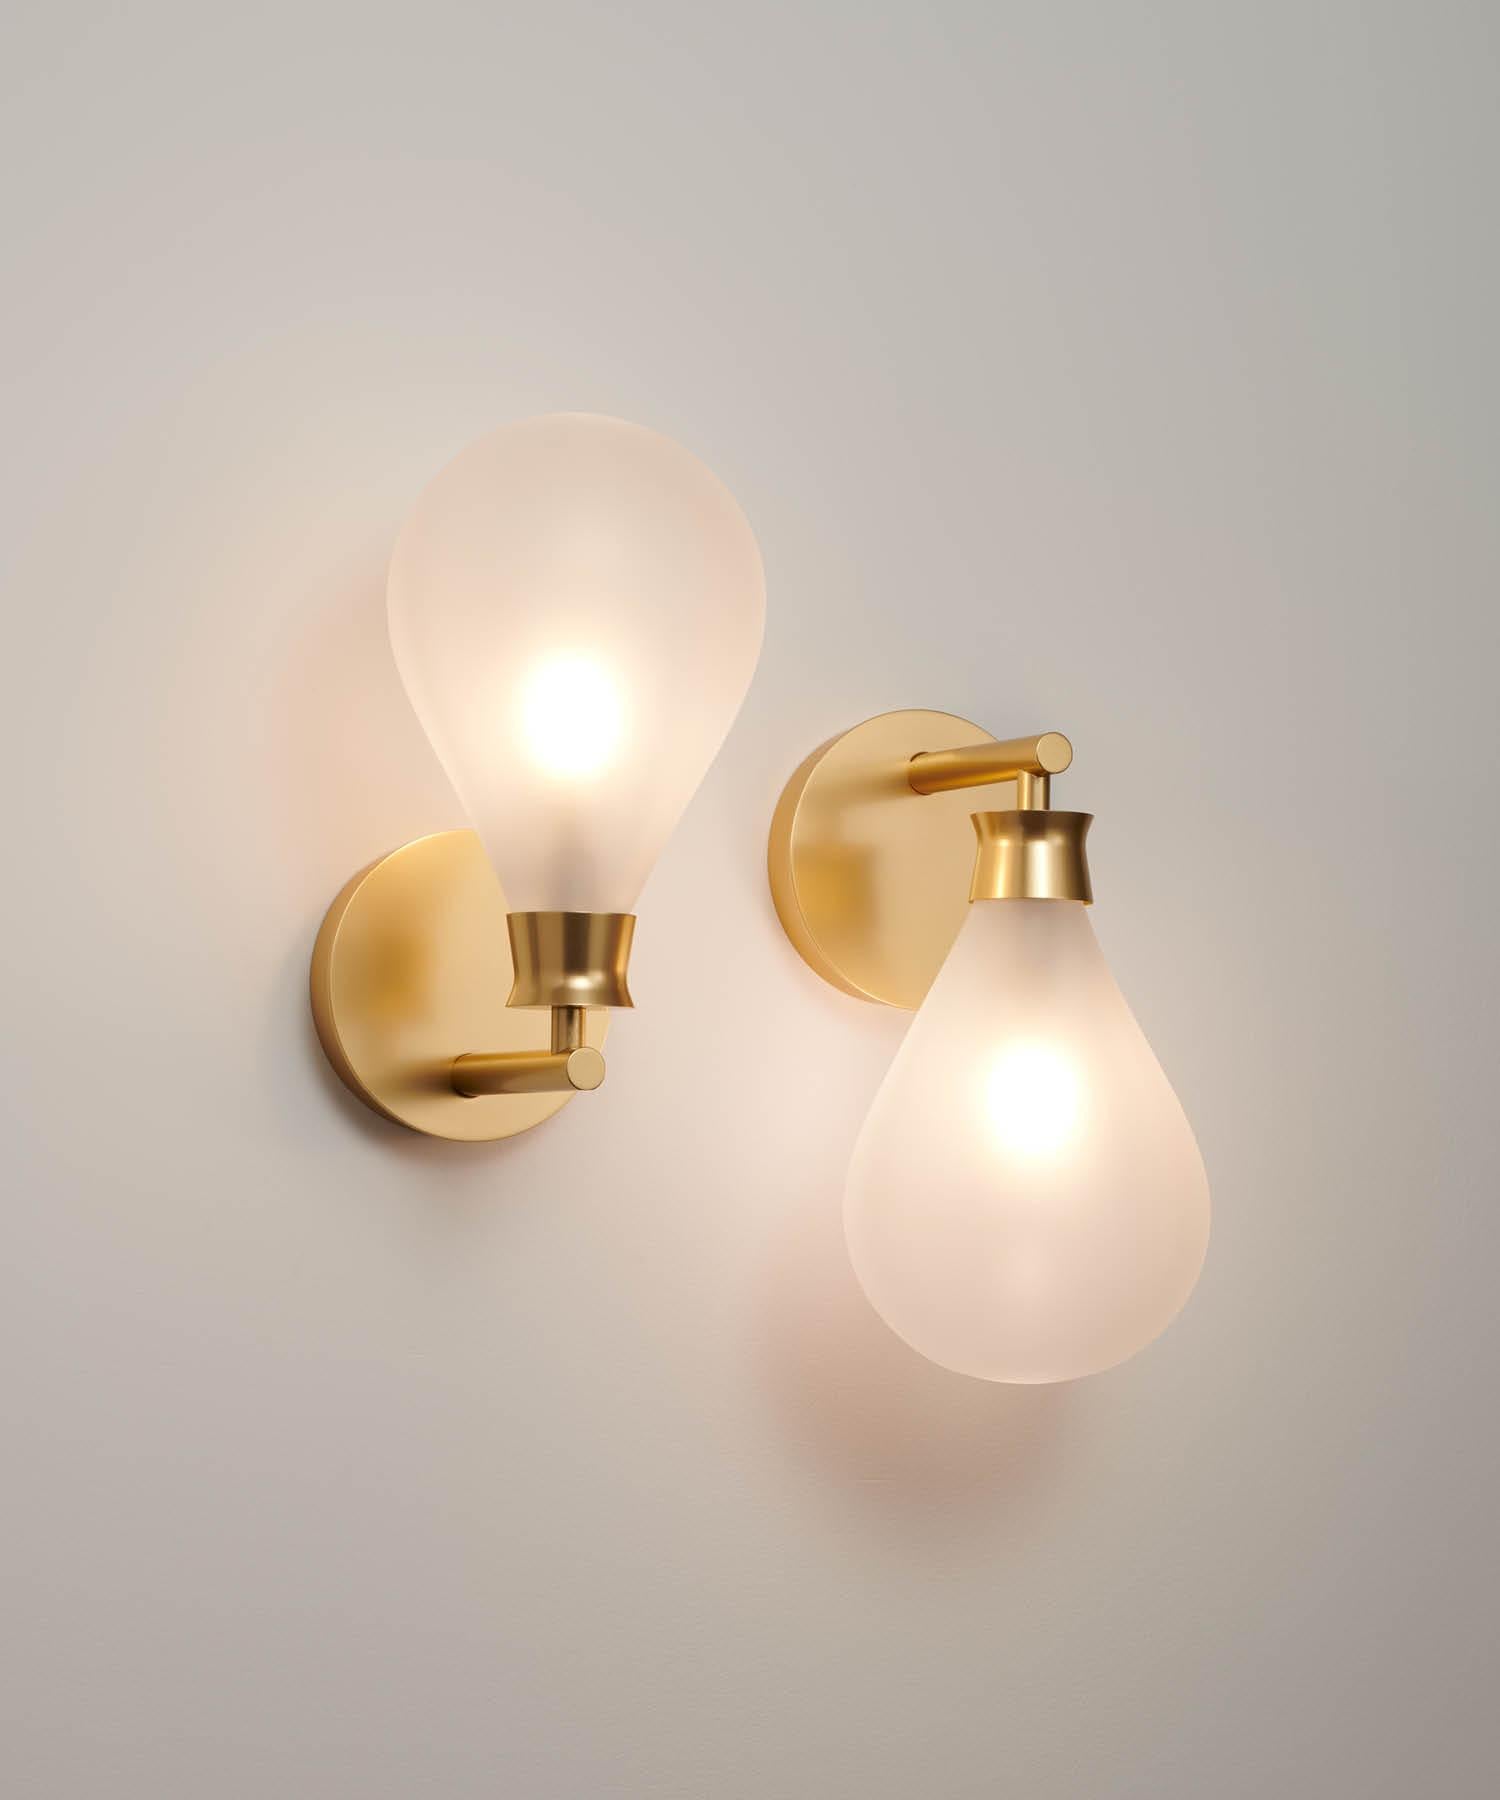 Polished Cintola Wall Light in Satin Gold with Amber Handblown Glass Globe